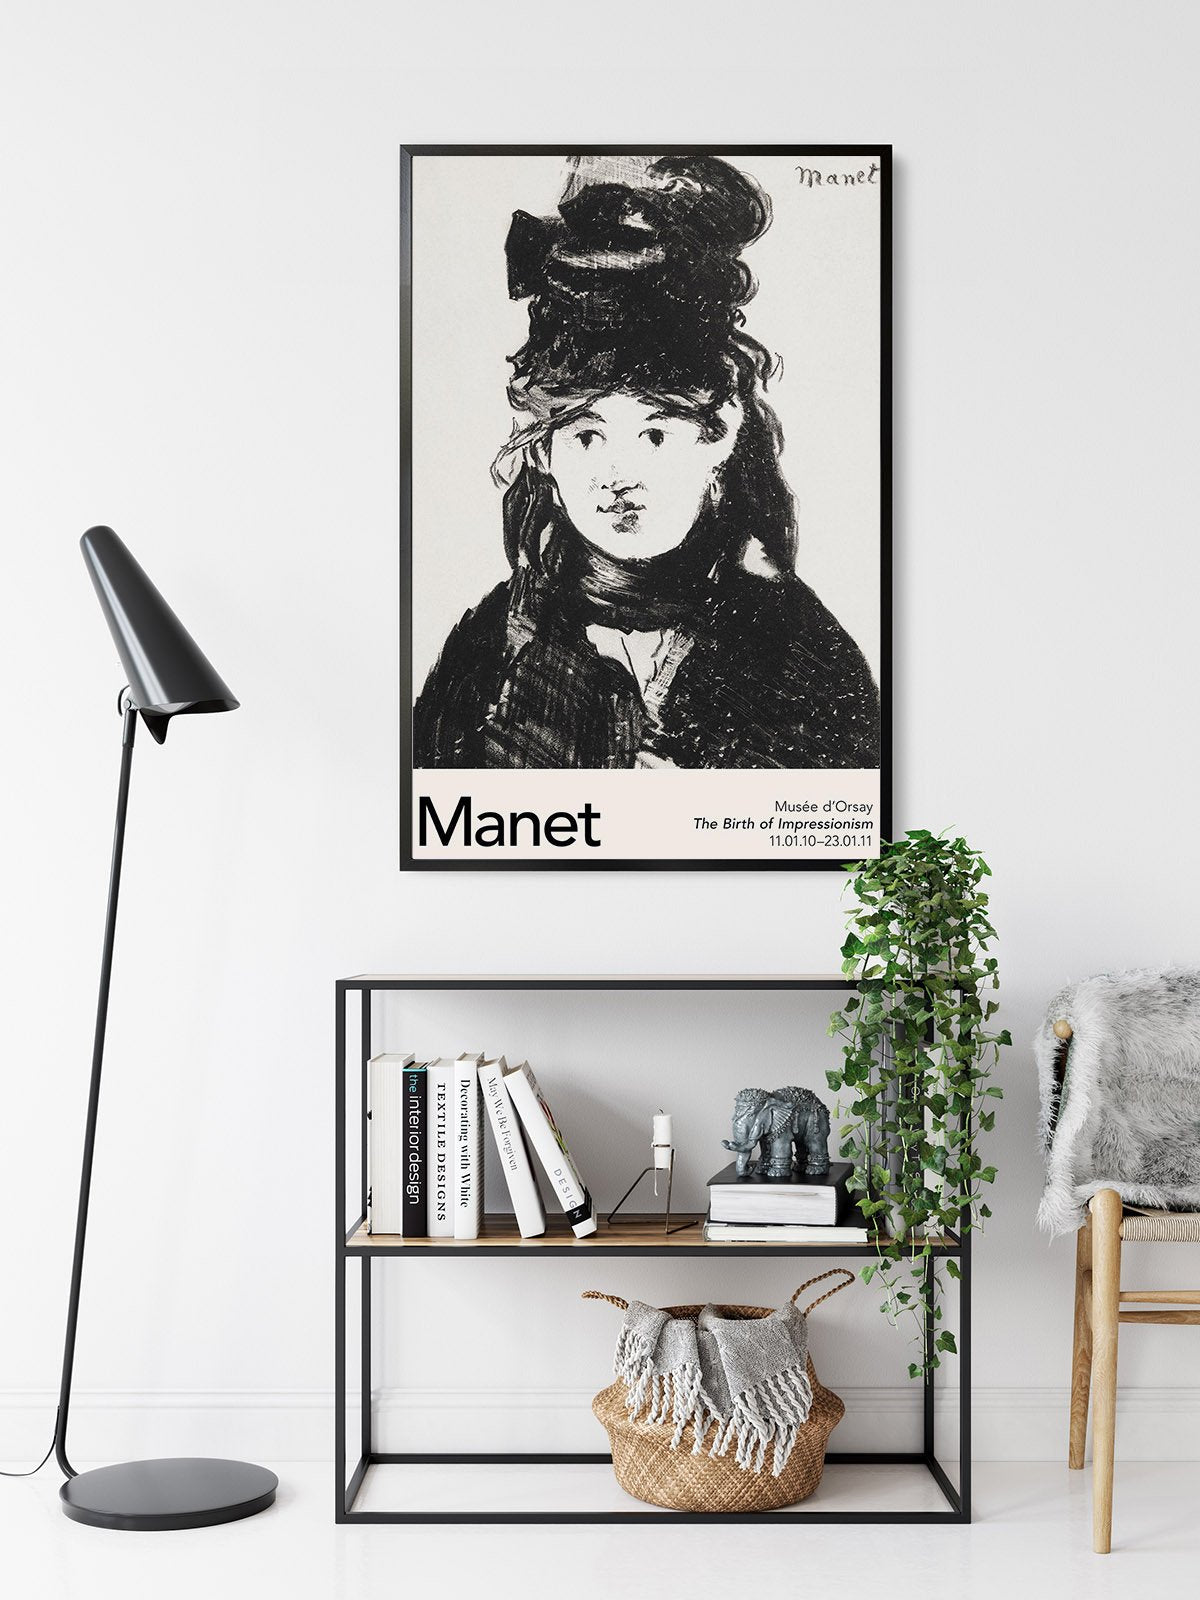 Berthe Morisot Nr 1 by Manet Exhibition Poster